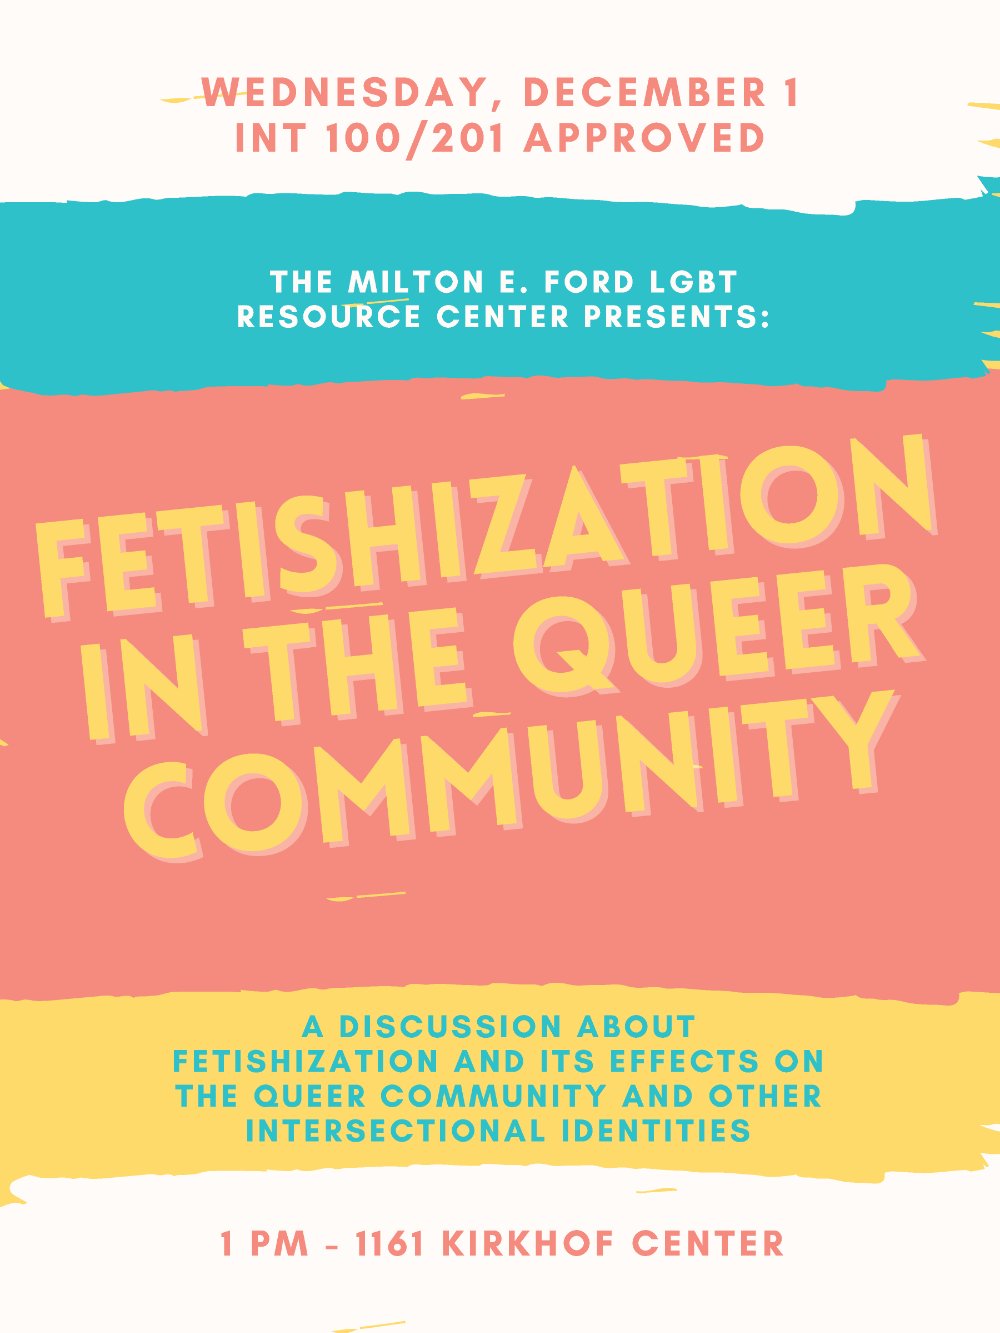 Fetishization in the Queer Community: A discussion on Fetishization and its effects on the queer community and other intersectional identities. 1PM at 1161 Kirkhof Center